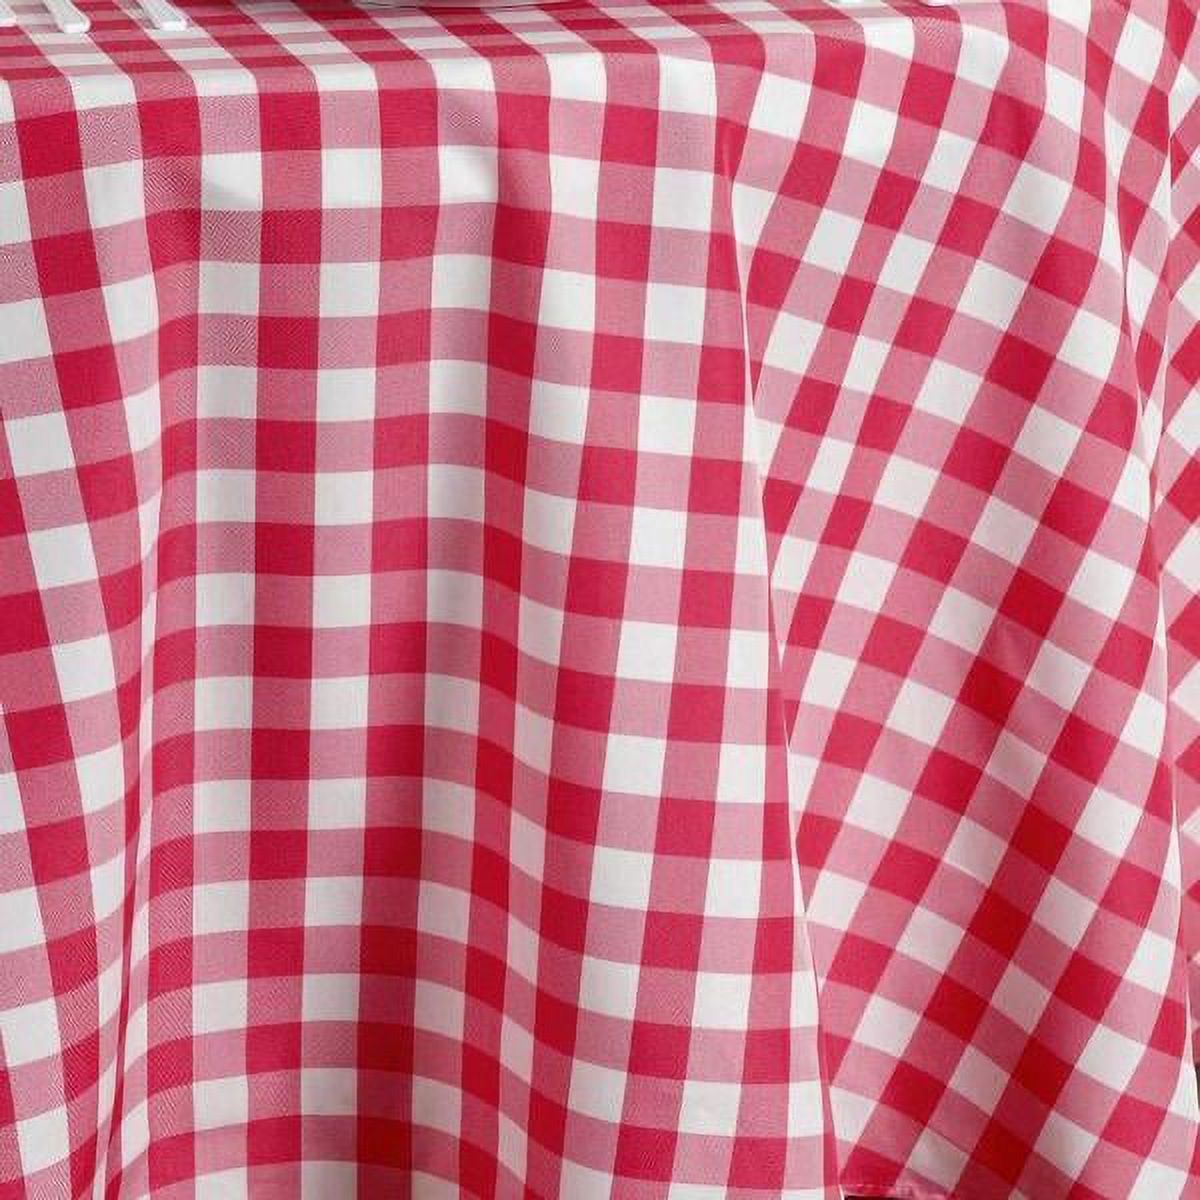 BalsaCircle 54" x 54" Square Gingham Checkered Polyester Tablecloth Red and White - image 3 of 9